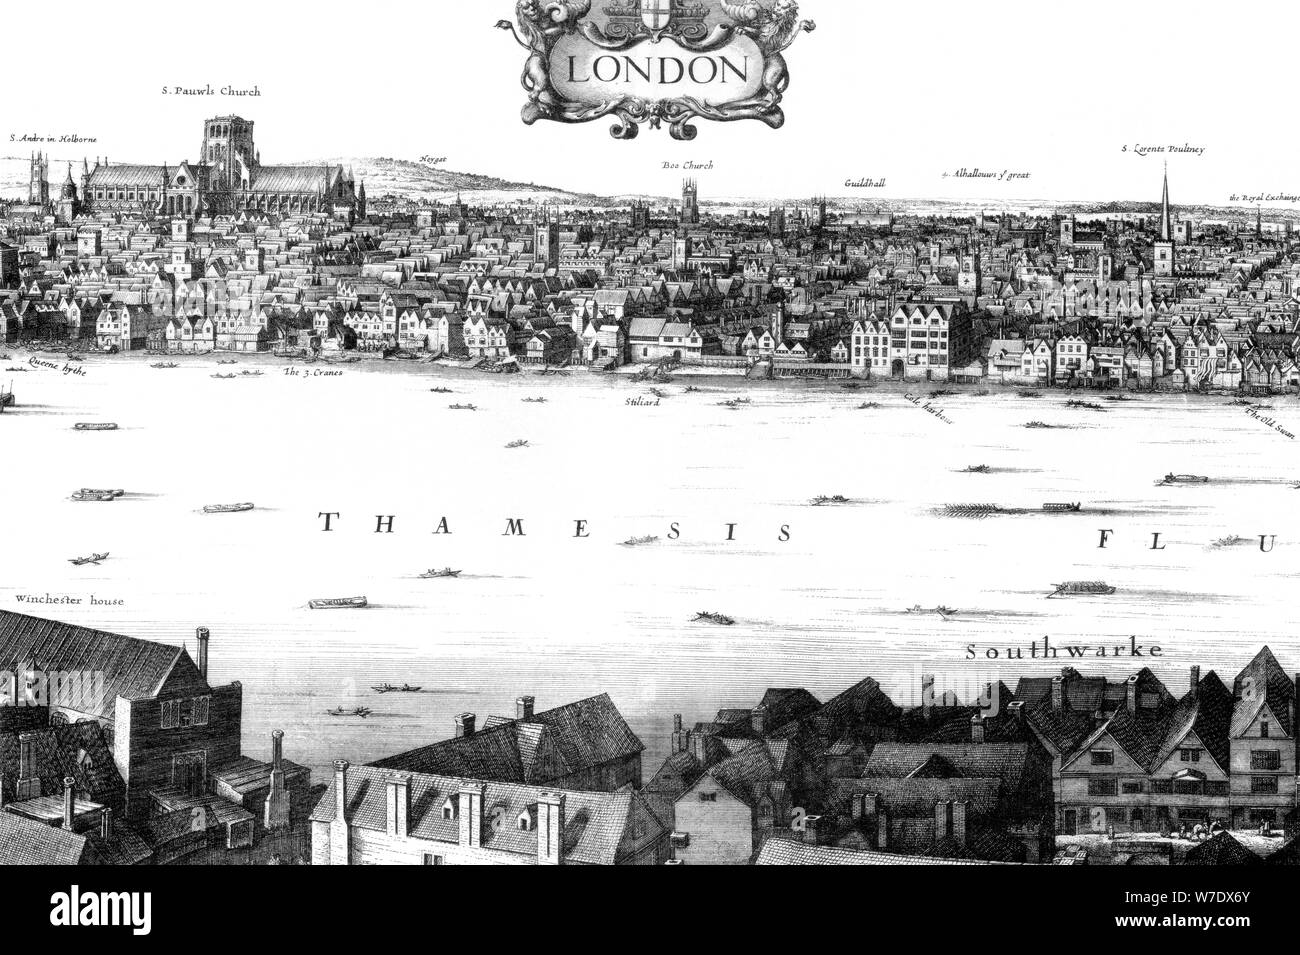 View of London and the Thames from South Bank, 17th century (1886).Artist: William Griggs Stock Photo